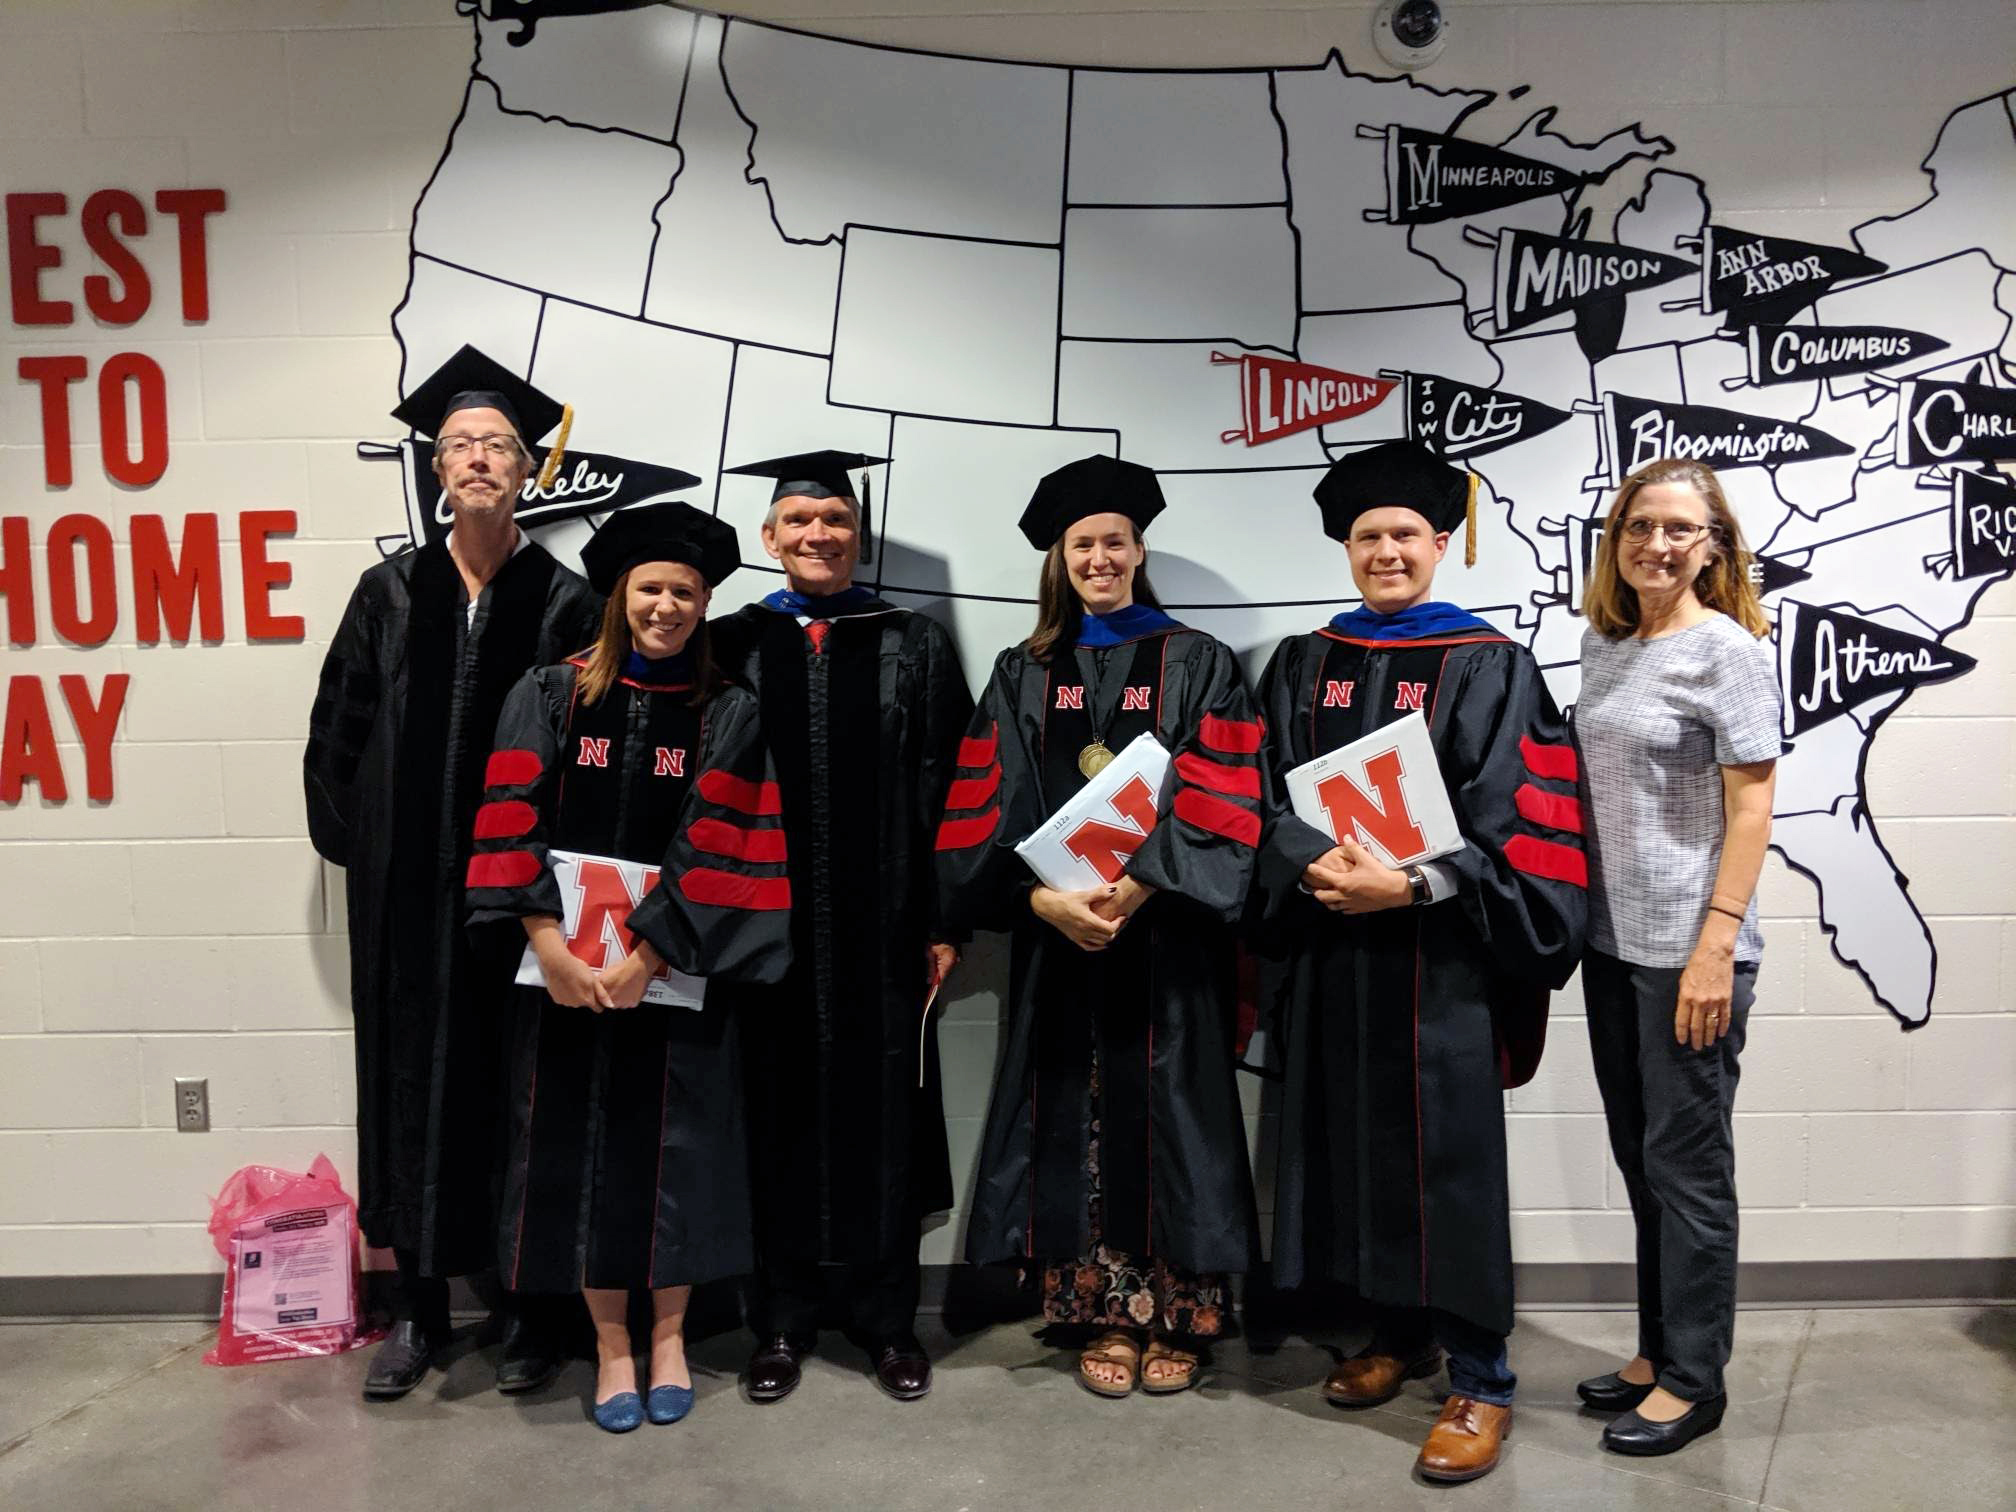 A few of our graduates during Nebraska commencement ceremonies on Aug. 17 at Pinnacle Bank Arena. | Elyse Watson, School of Natural Resources